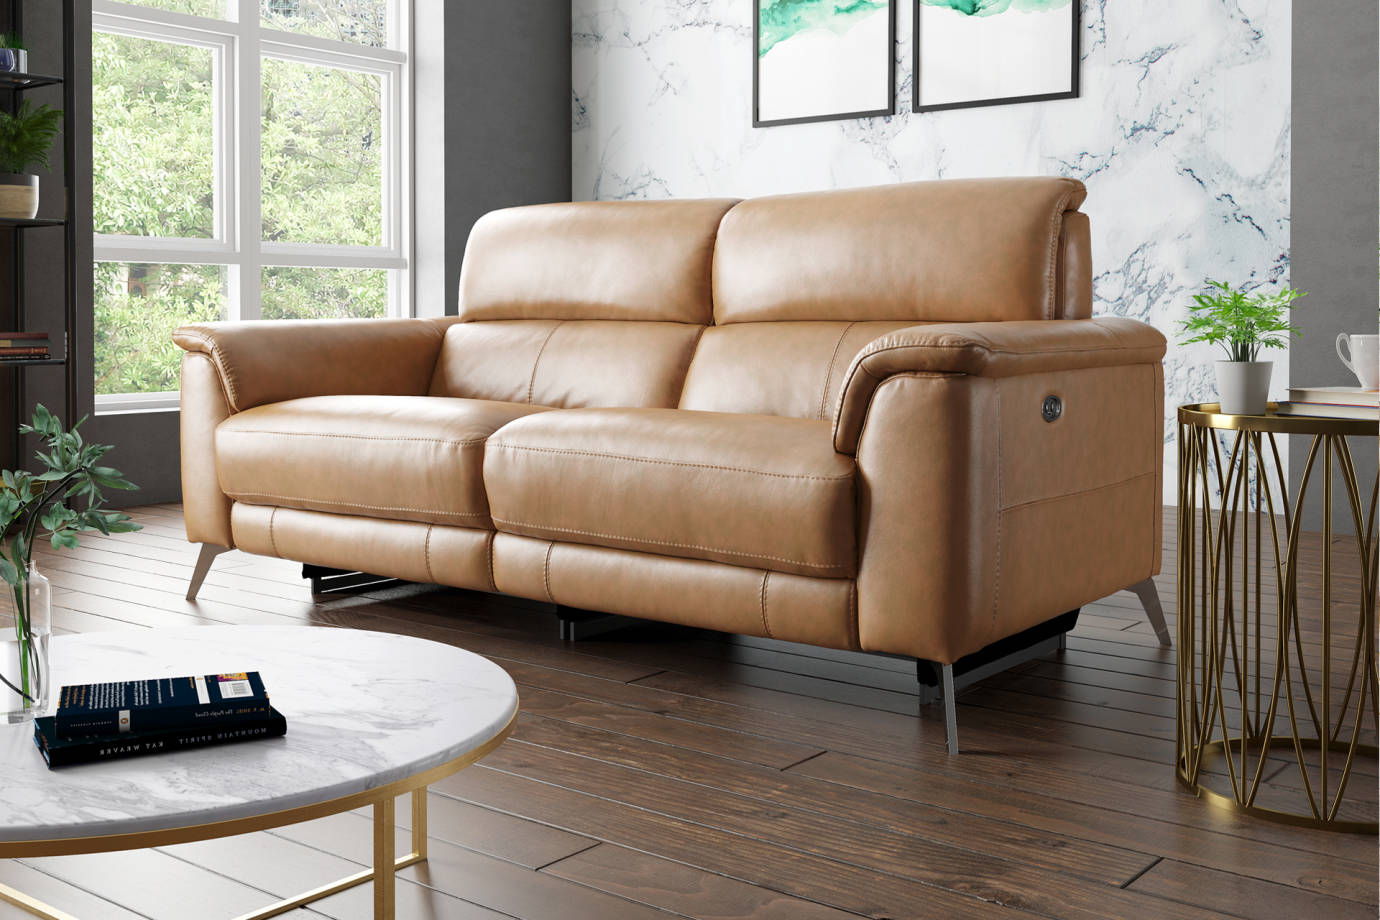 Recliner Sofas Leather Fabric And, Contemporary Leather Recliner Couch